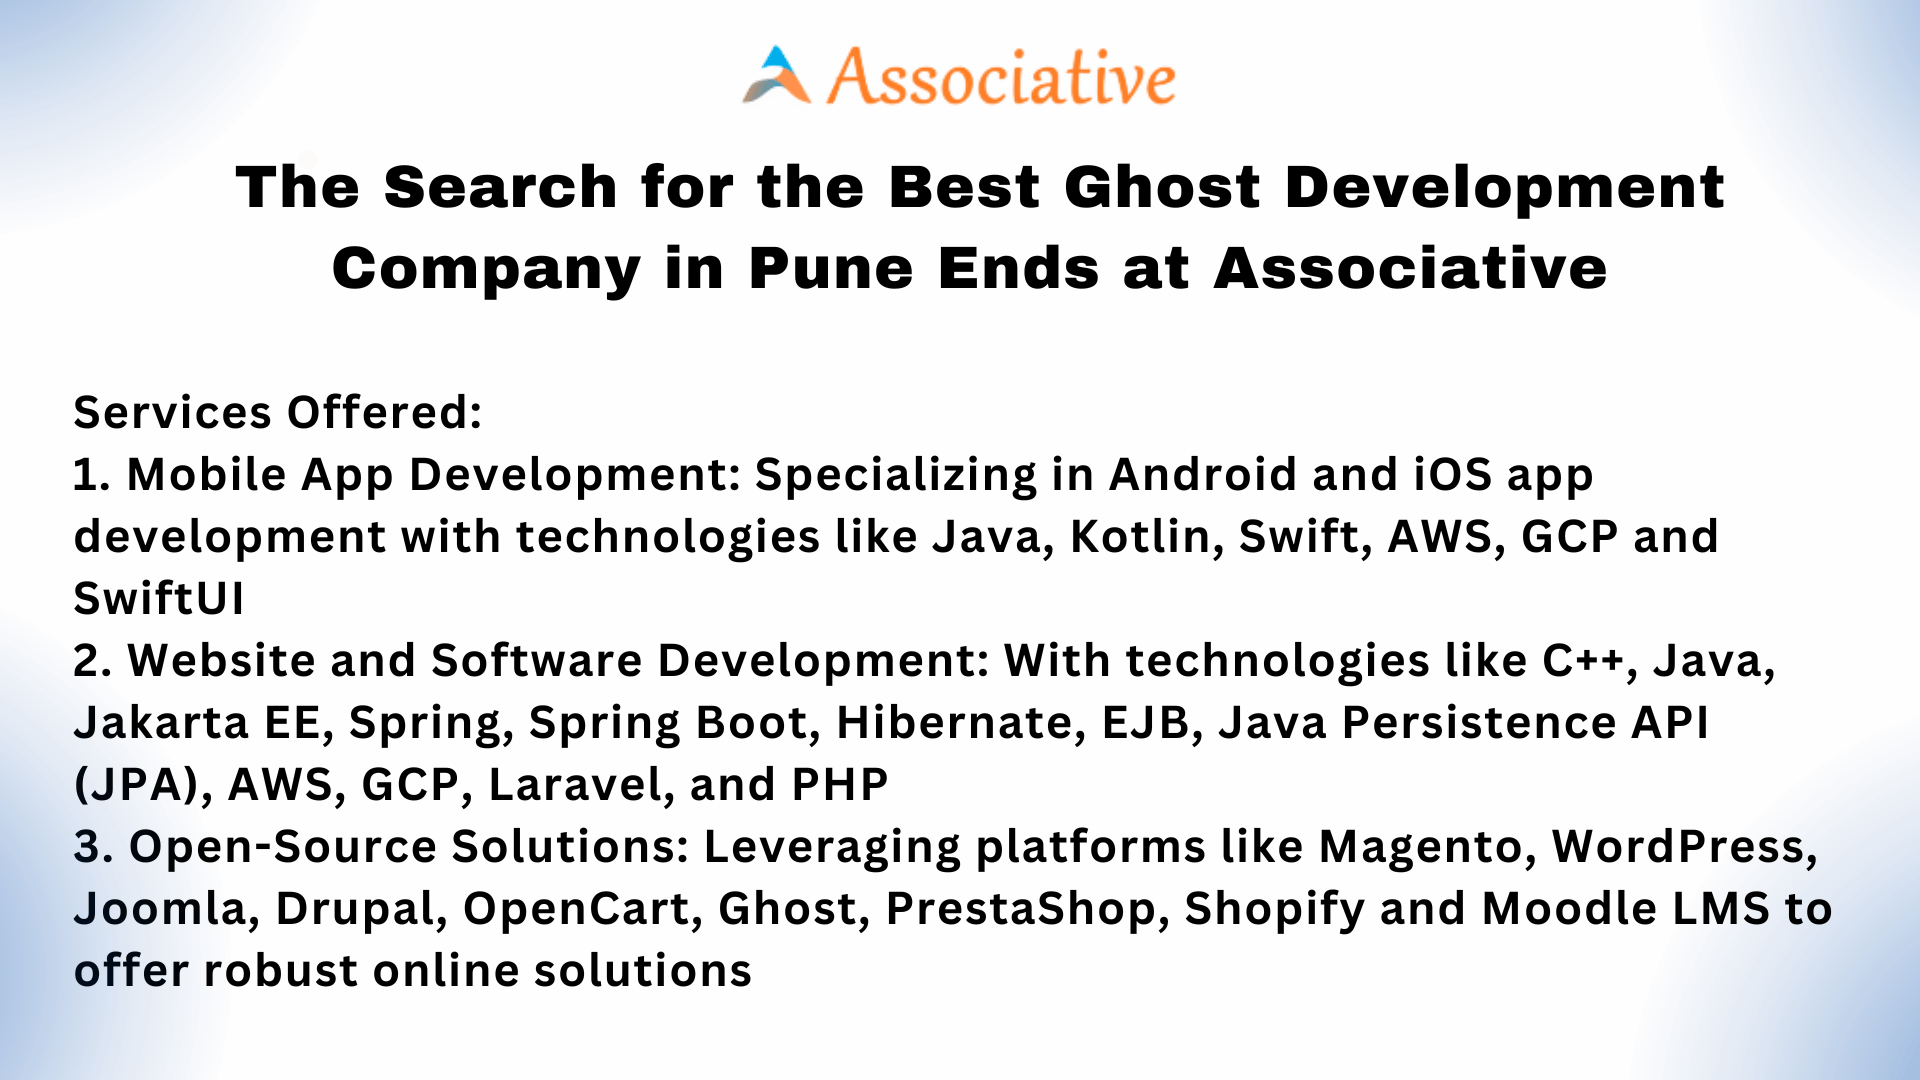 The Search for the Best Ghost Development Company in Pune Ends at Associative